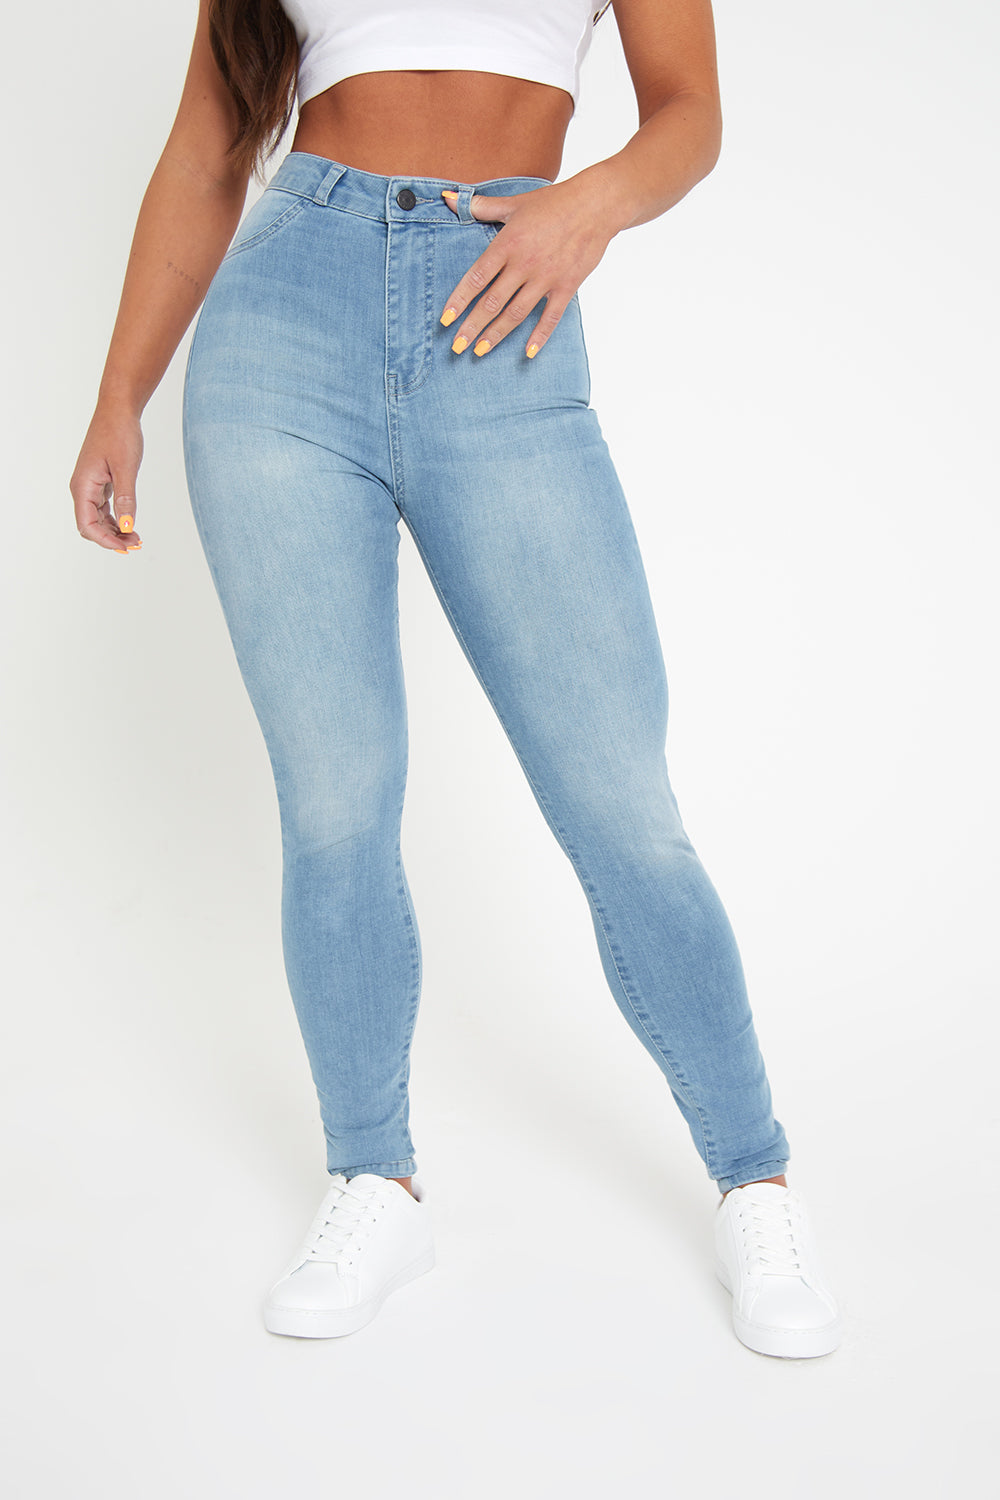 Waisted Jeans Light Blue - TAILORED ATHLETE - USA